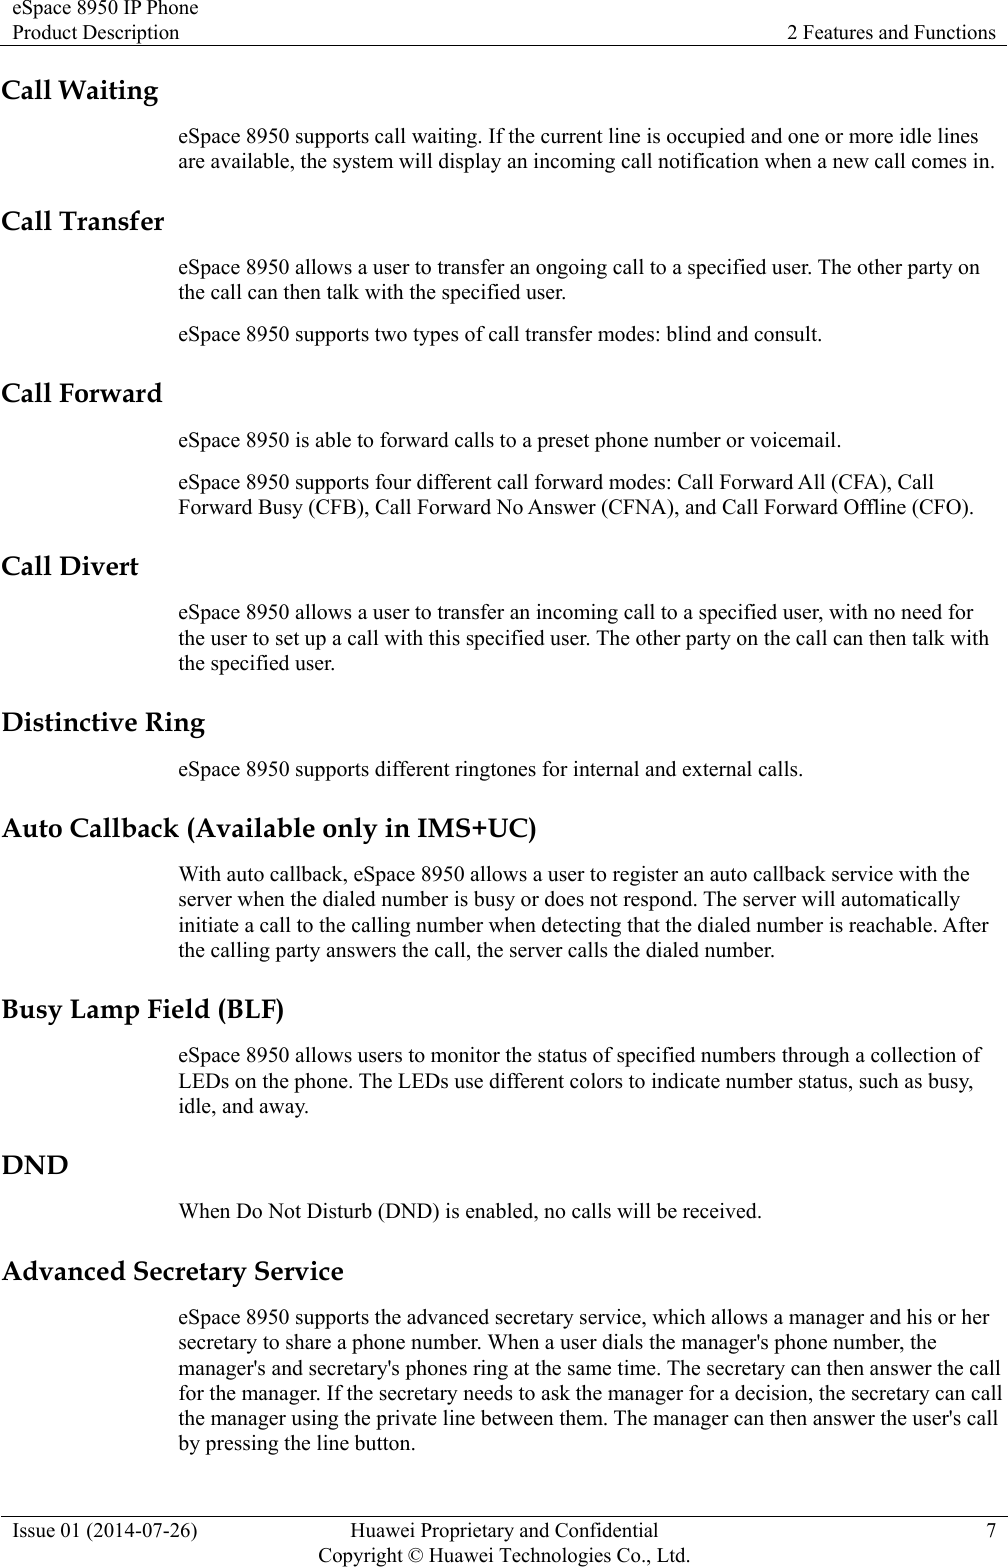 eSpace 8950 IP Phone Product Description  2 Features and Functions Issue 01 (2014-07-26)  Huawei Proprietary and Confidential         Copyright © Huawei Technologies Co., Ltd.7 Call Waiting eSpace 8950 supports call waiting. If the current line is occupied and one or more idle lines are available, the system will display an incoming call notification when a new call comes in. Call Transfer eSpace 8950 allows a user to transfer an ongoing call to a specified user. The other party on the call can then talk with the specified user. eSpace 8950 supports two types of call transfer modes: blind and consult. Call Forward eSpace 8950 is able to forward calls to a preset phone number or voicemail. eSpace 8950 supports four different call forward modes: Call Forward All (CFA), Call Forward Busy (CFB), Call Forward No Answer (CFNA), and Call Forward Offline (CFO). Call Divert eSpace 8950 allows a user to transfer an incoming call to a specified user, with no need for the user to set up a call with this specified user. The other party on the call can then talk with the specified user. Distinctive Ring eSpace 8950 supports different ringtones for internal and external calls. Auto Callback (Available only in IMS+UC) With auto callback, eSpace 8950 allows a user to register an auto callback service with the server when the dialed number is busy or does not respond. The server will automatically initiate a call to the calling number when detecting that the dialed number is reachable. After the calling party answers the call, the server calls the dialed number. Busy Lamp Field (BLF) eSpace 8950 allows users to monitor the status of specified numbers through a collection of LEDs on the phone. The LEDs use different colors to indicate number status, such as busy, idle, and away. DND When Do Not Disturb (DND) is enabled, no calls will be received. Advanced Secretary Service eSpace 8950 supports the advanced secretary service, which allows a manager and his or her secretary to share a phone number. When a user dials the manager&apos;s phone number, the manager&apos;s and secretary&apos;s phones ring at the same time. The secretary can then answer the call for the manager. If the secretary needs to ask the manager for a decision, the secretary can call the manager using the private line between them. The manager can then answer the user&apos;s call by pressing the line button. 